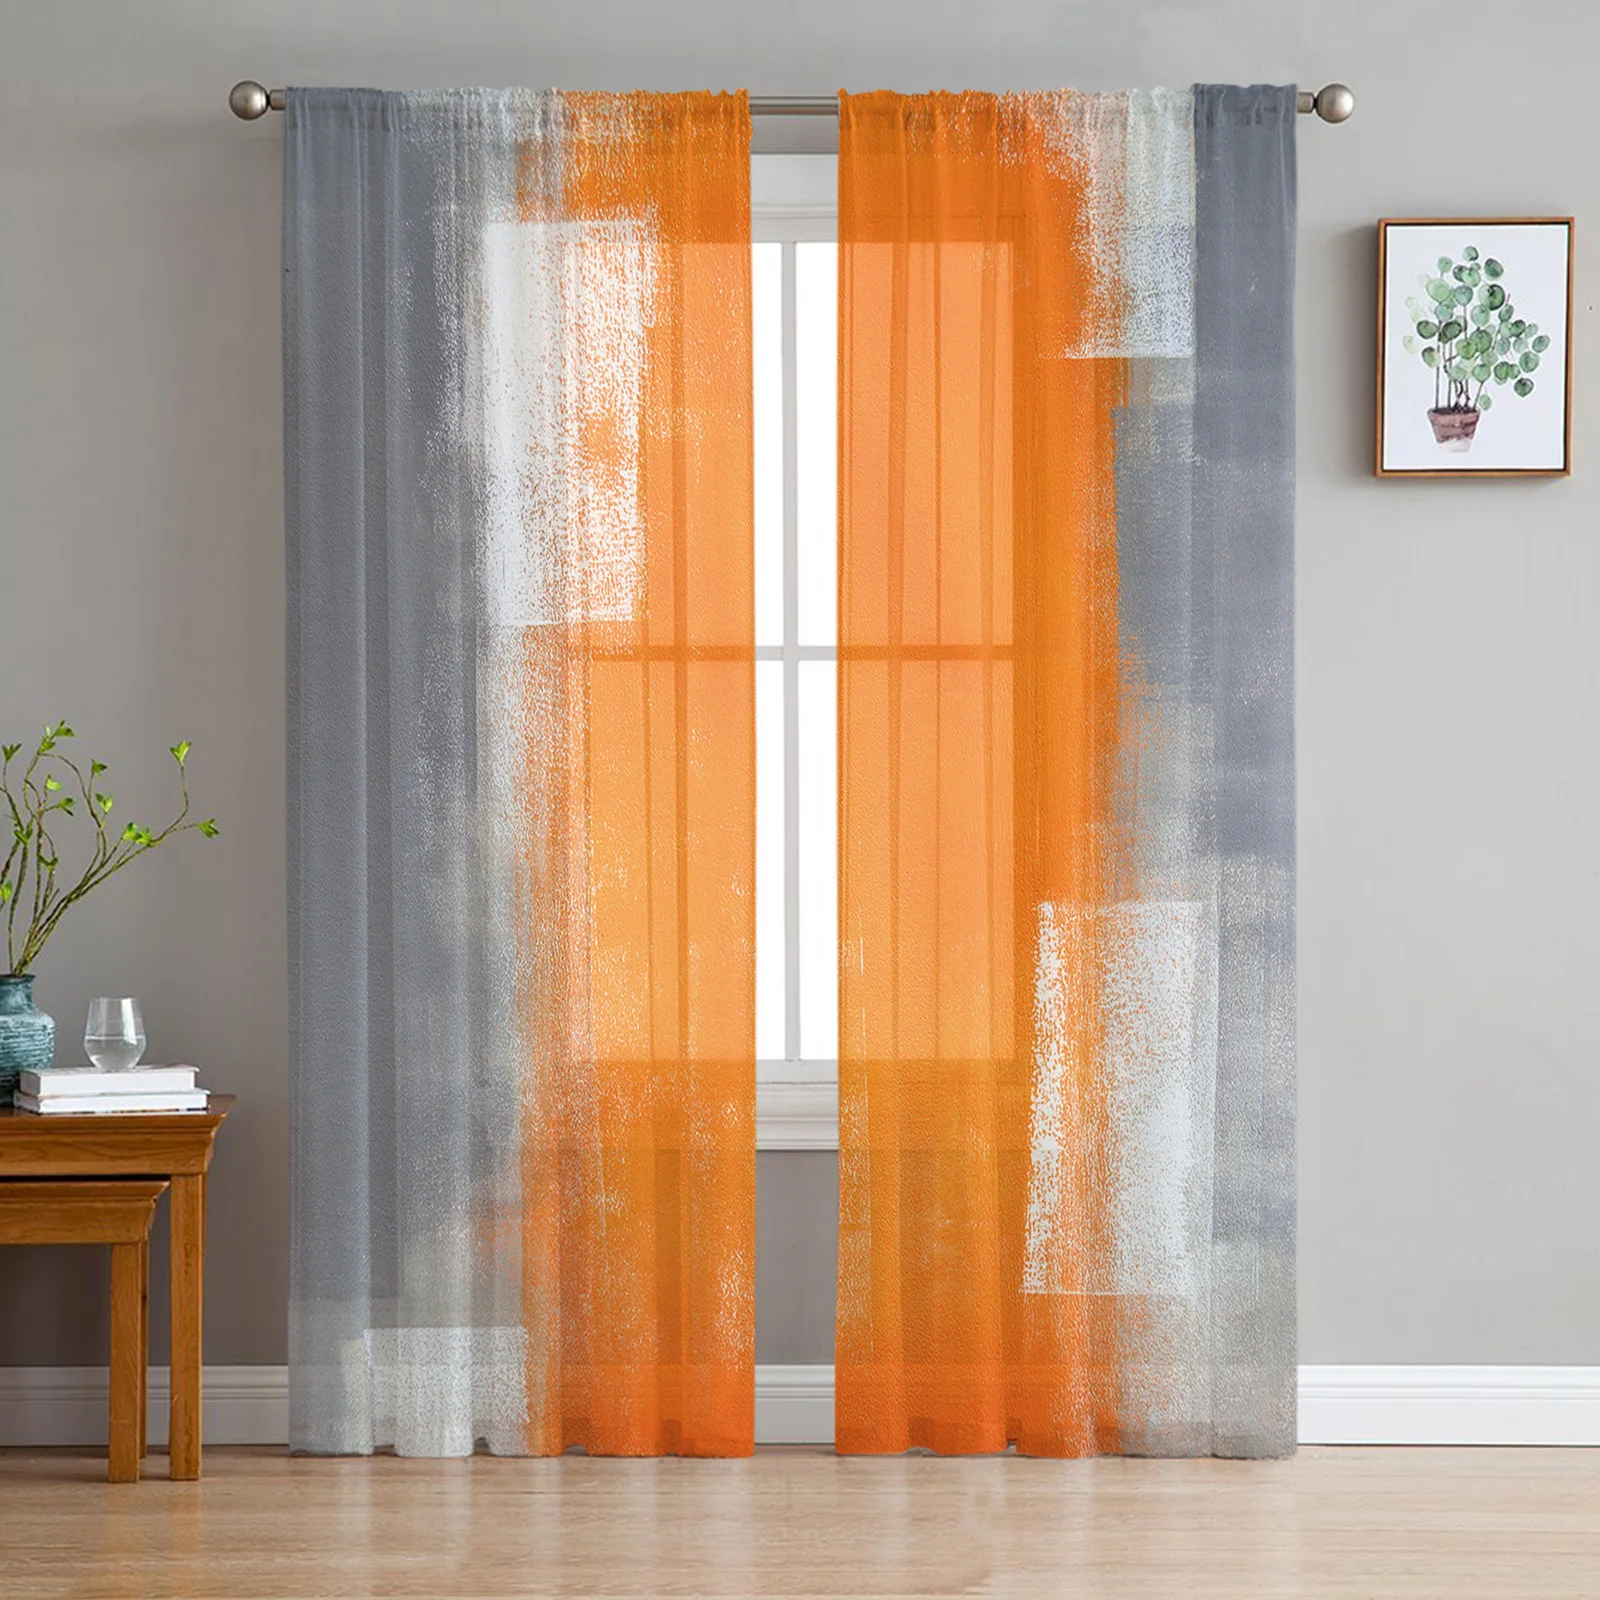 Woman Mural Window Curtains for Living Room Kitchen Door Curtain Sheer Curtains for Bedroom